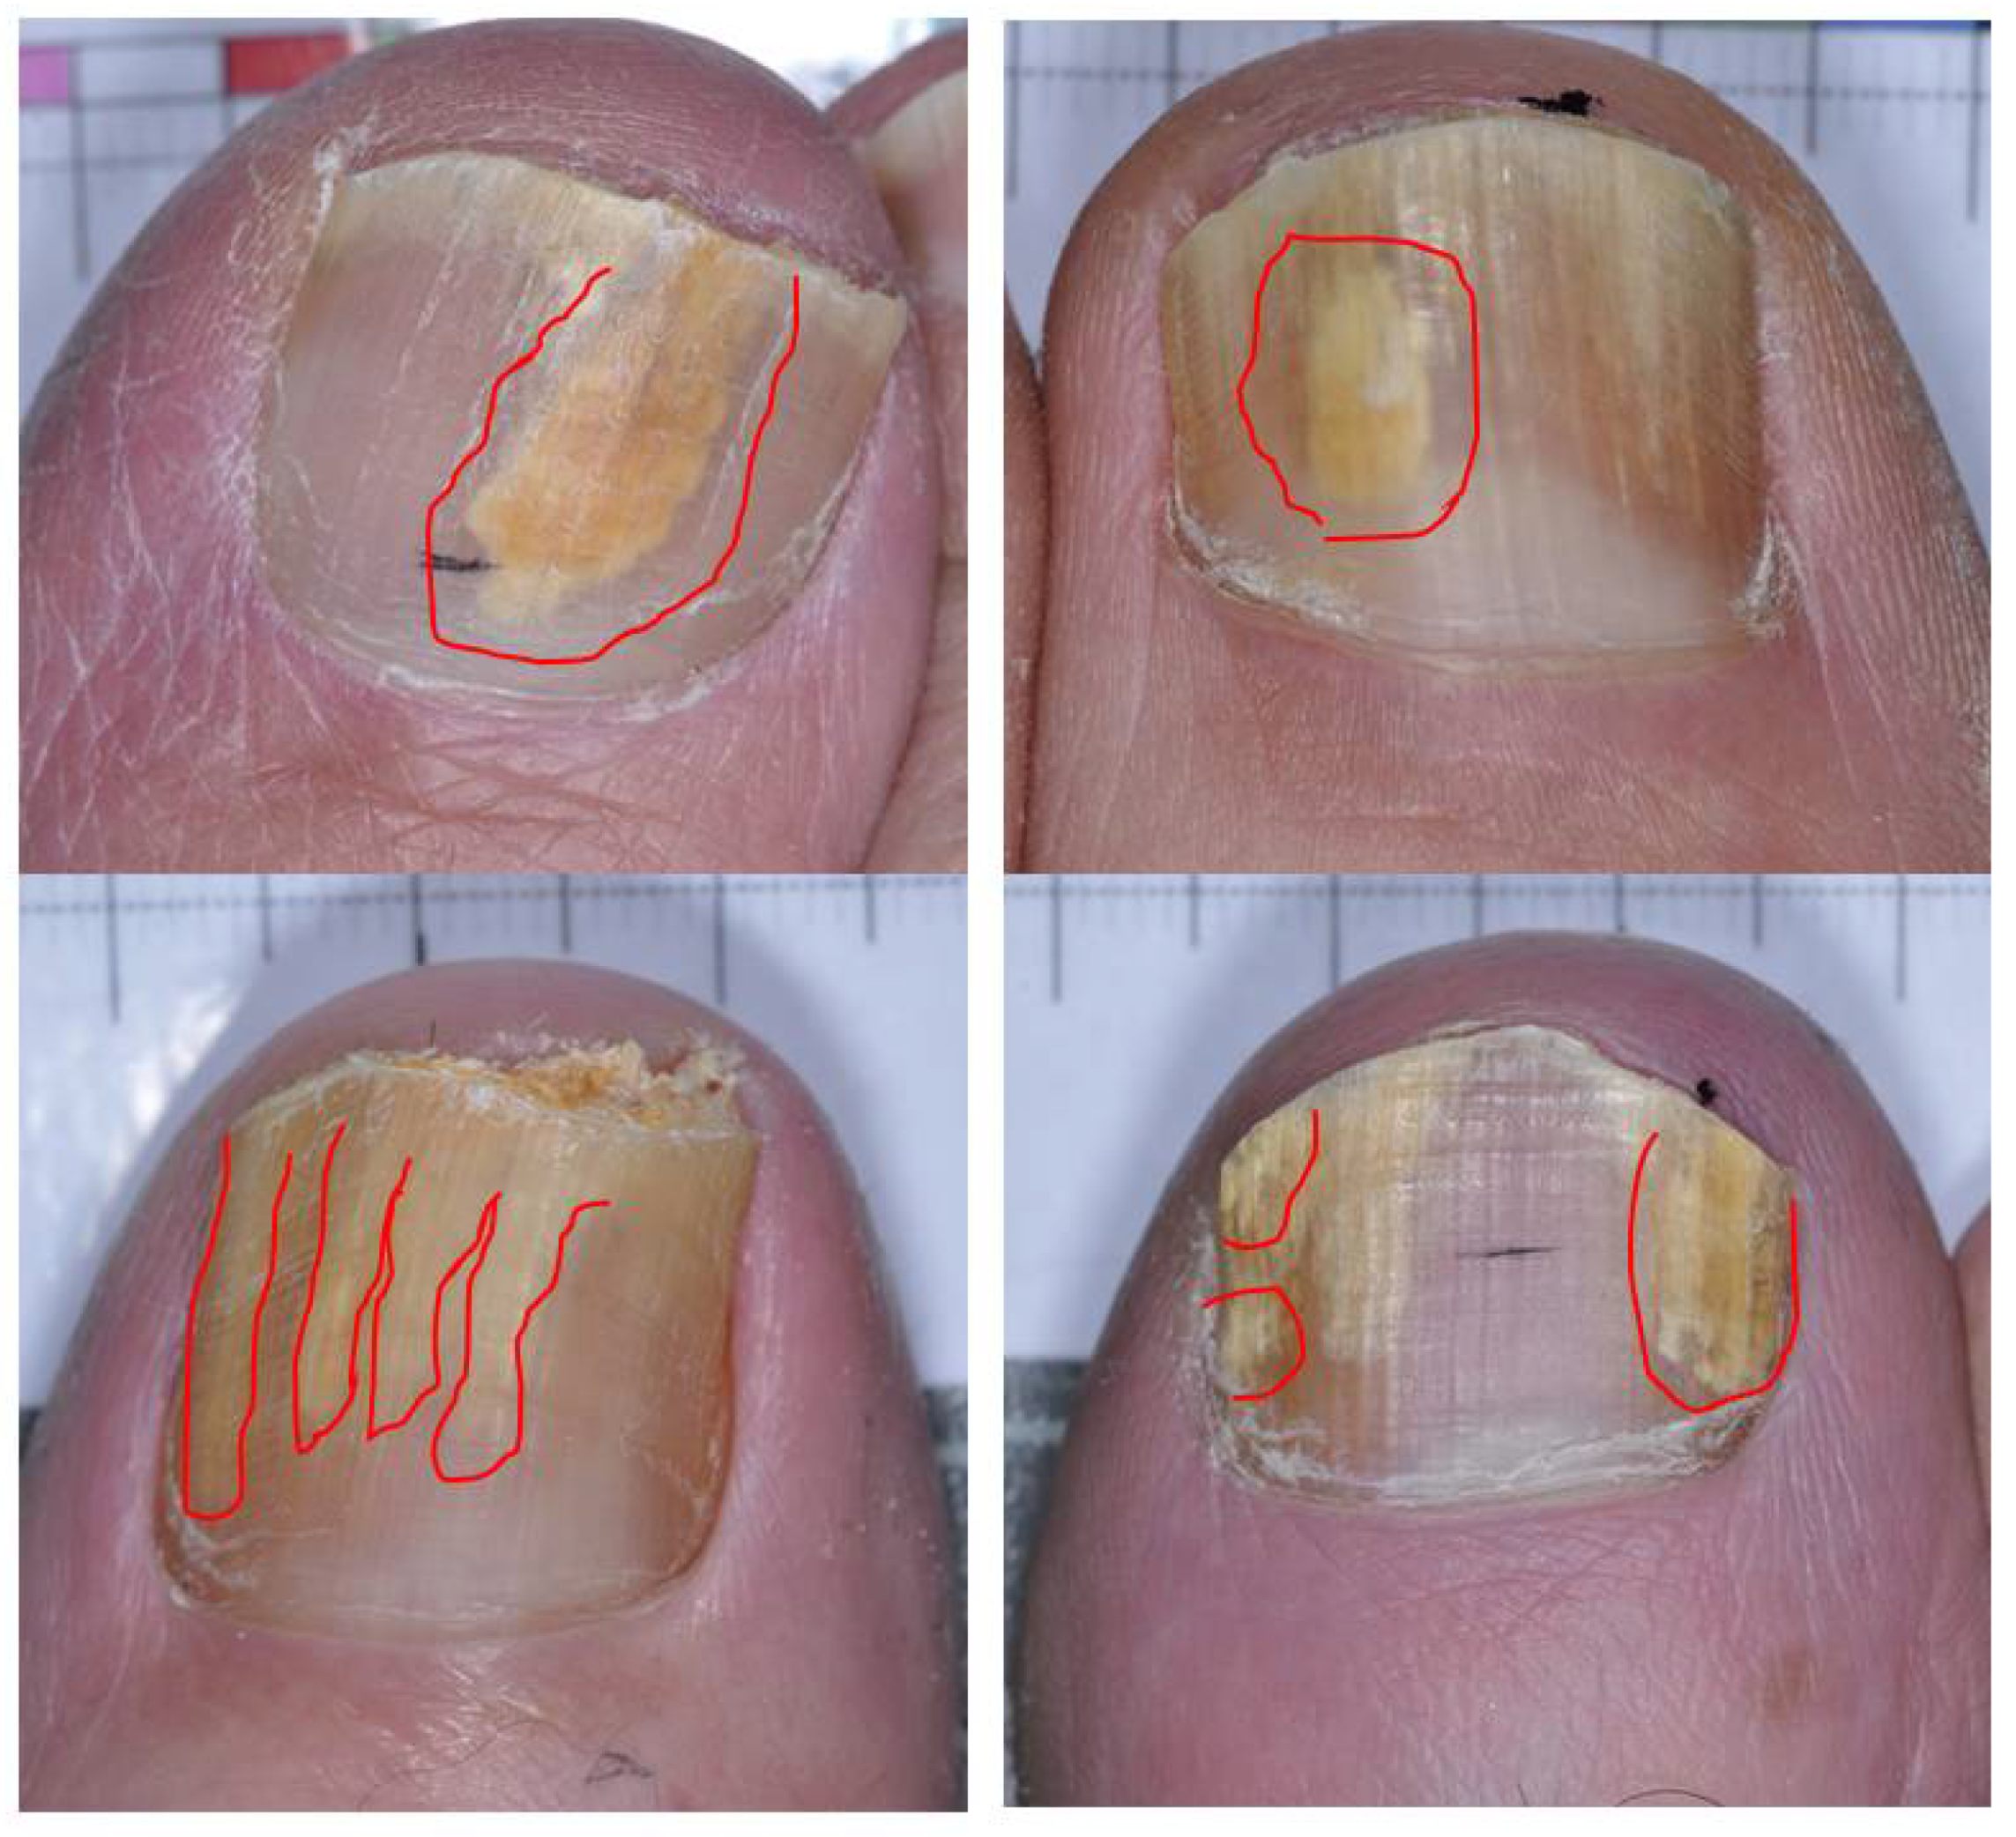 Current treatment of onychomycosis - Indian Journal of Dermatology,  Venereology and Leprology